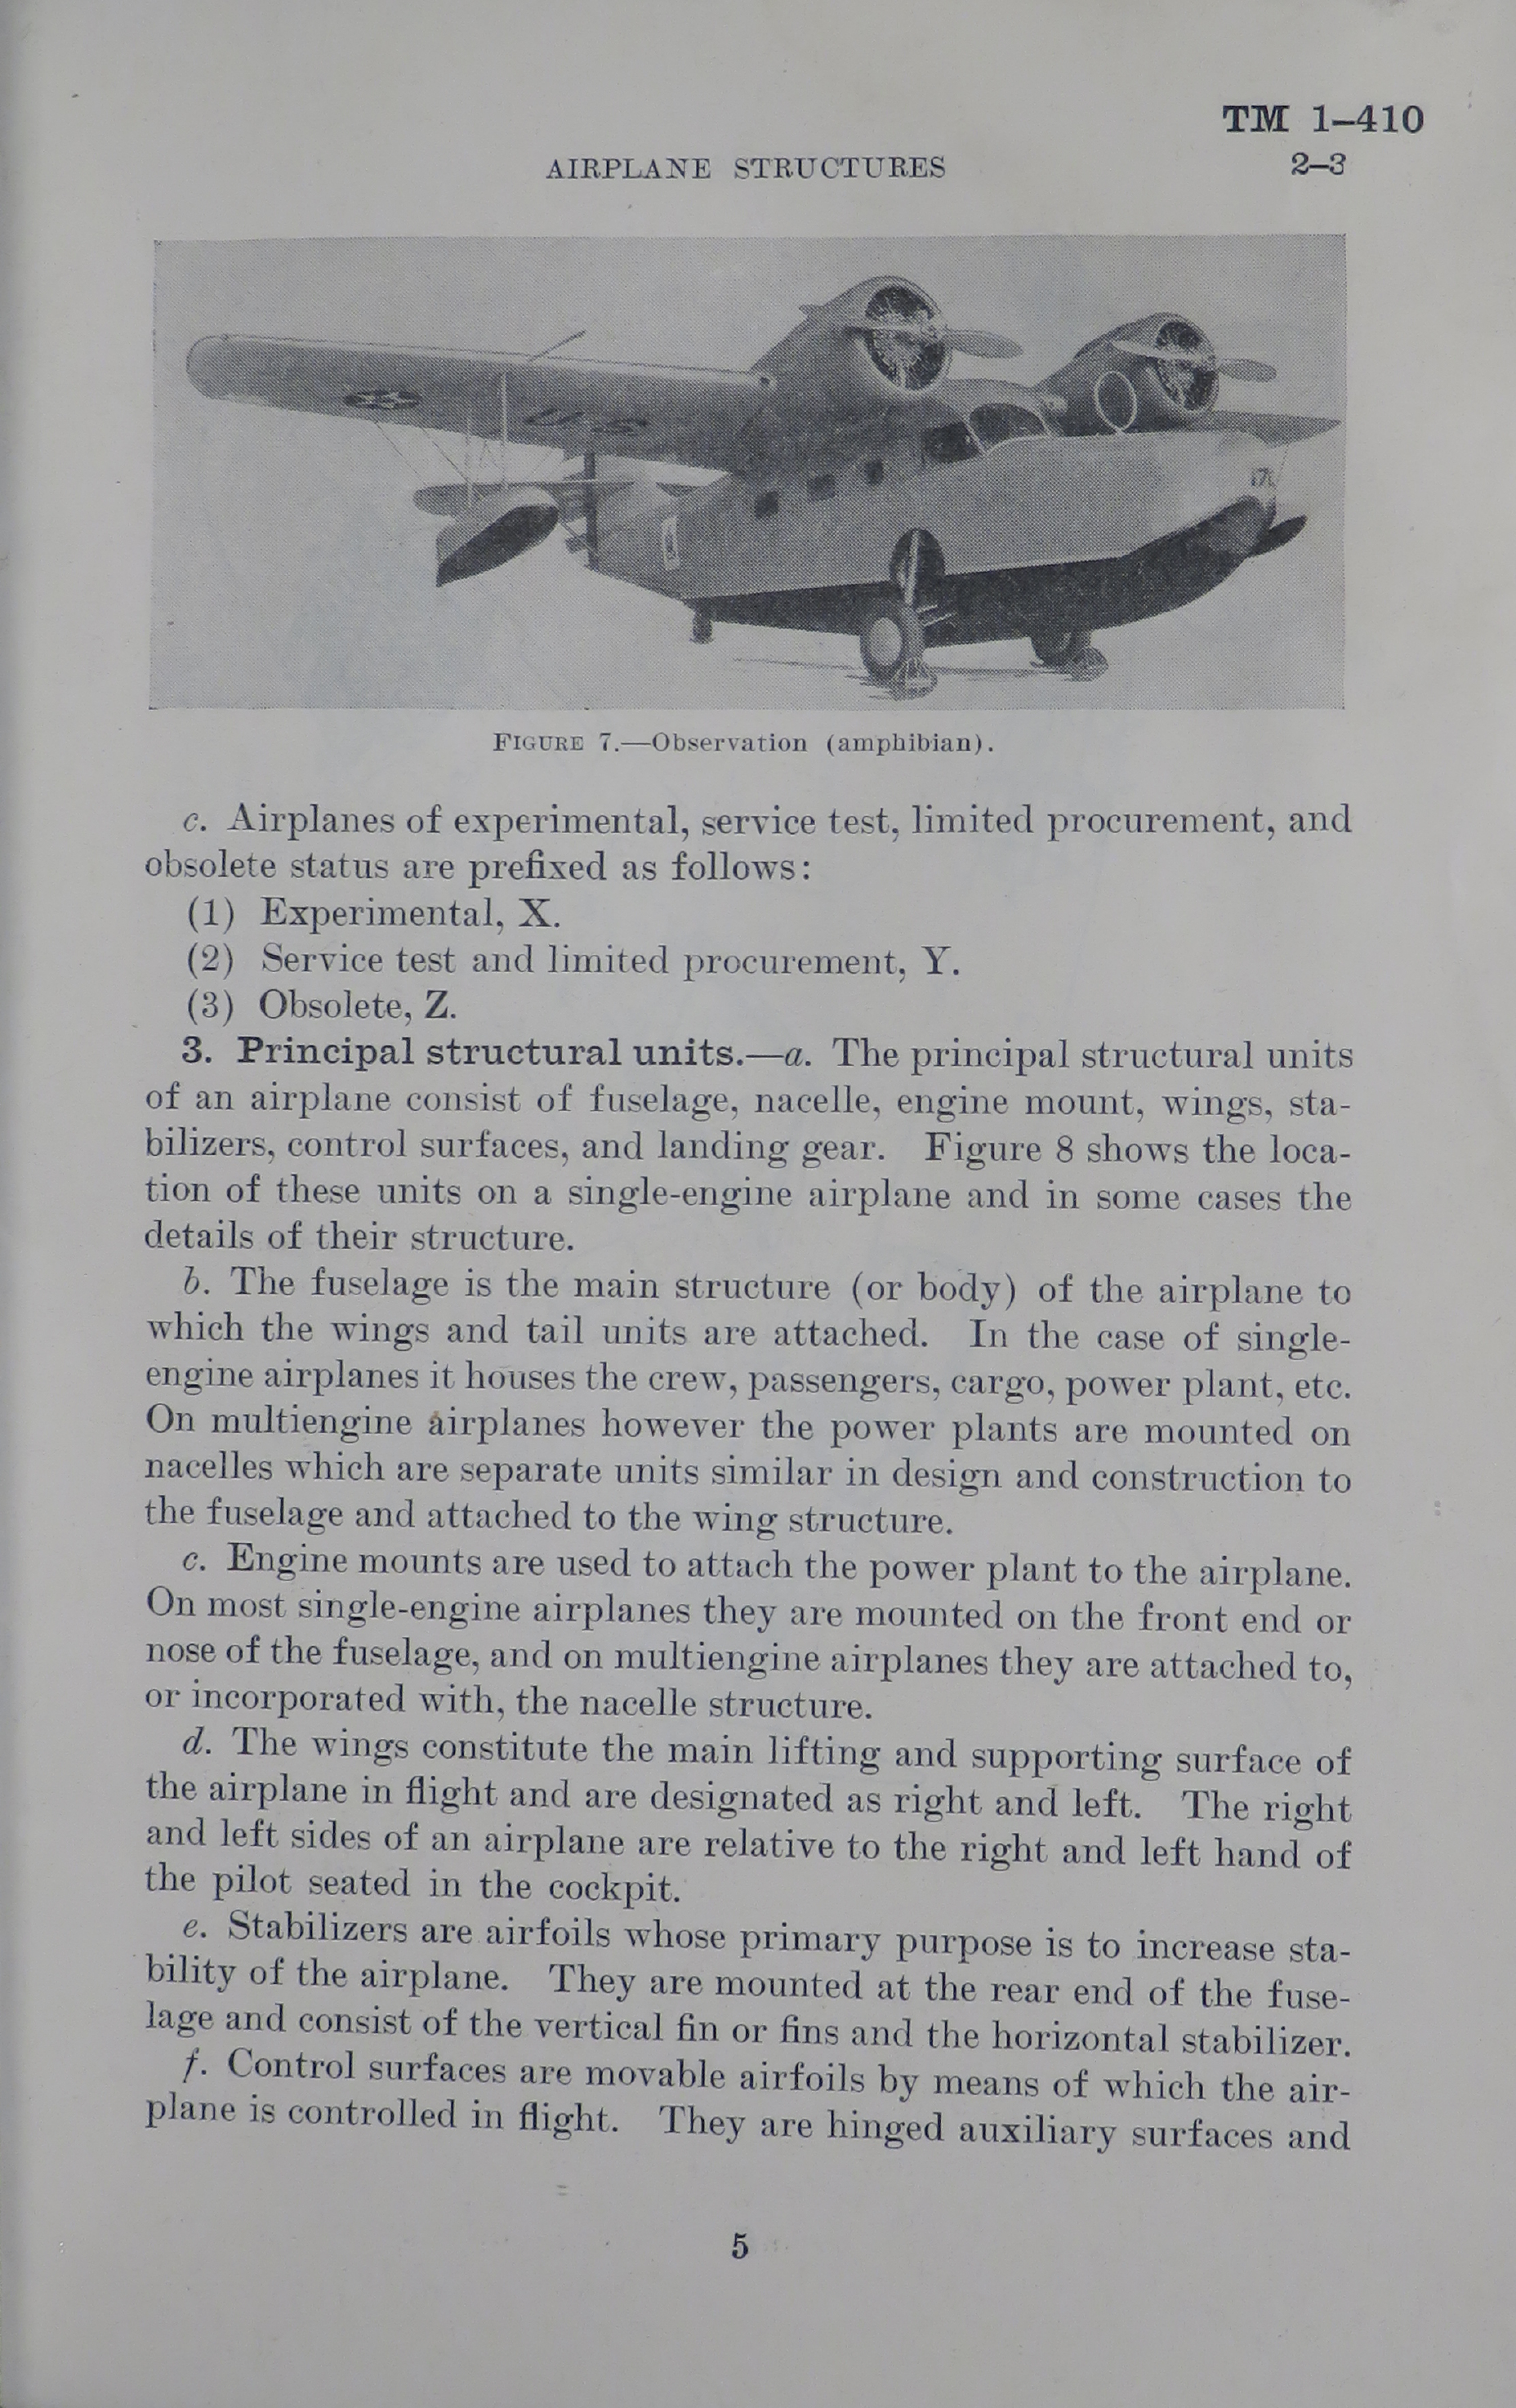 Sample page 7 from AirCorps Library document: Airplane Structures